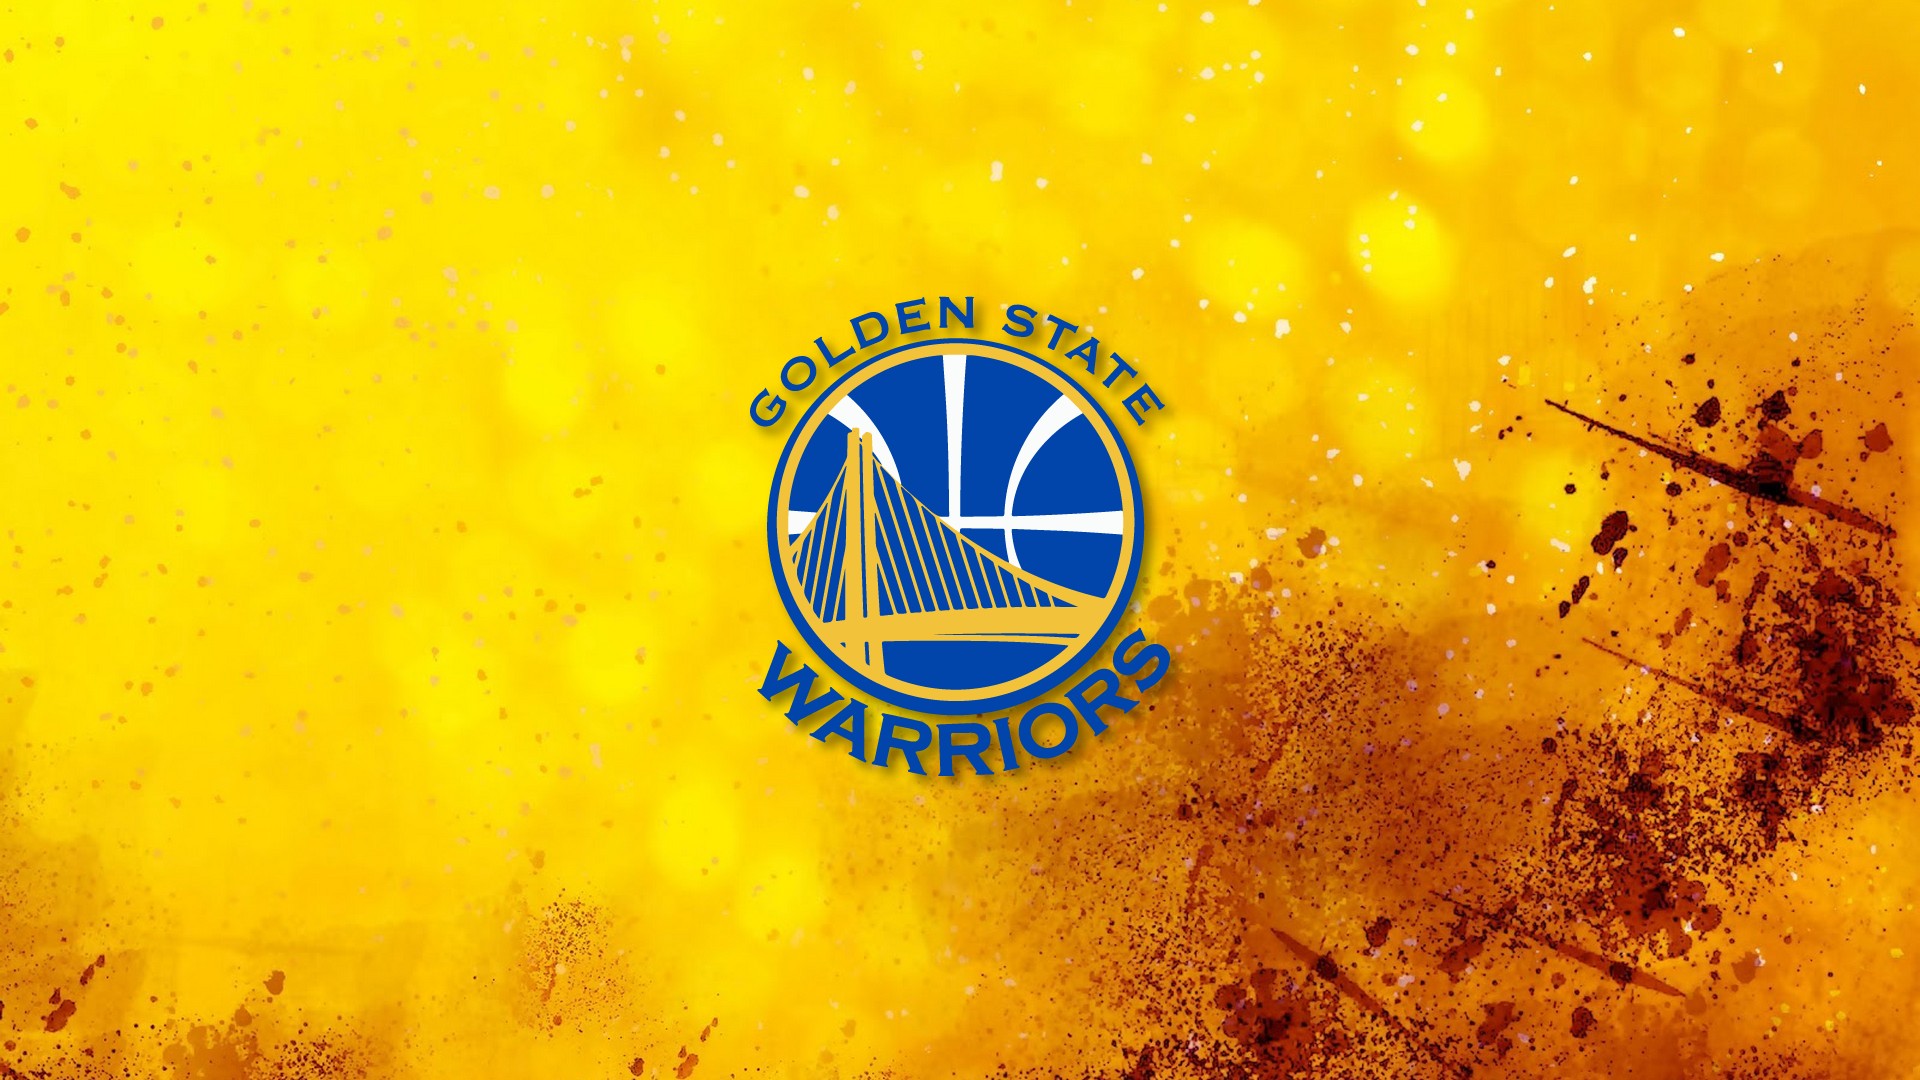 HD Desktop Wallpaper Golden State Warriors NBA with image dimensions 1920x1080 pixel. You can make this wallpaper for your Desktop Computer Backgrounds, Windows or Mac Screensavers, iPhone Lock screen, Tablet or Android and another Mobile Phone device